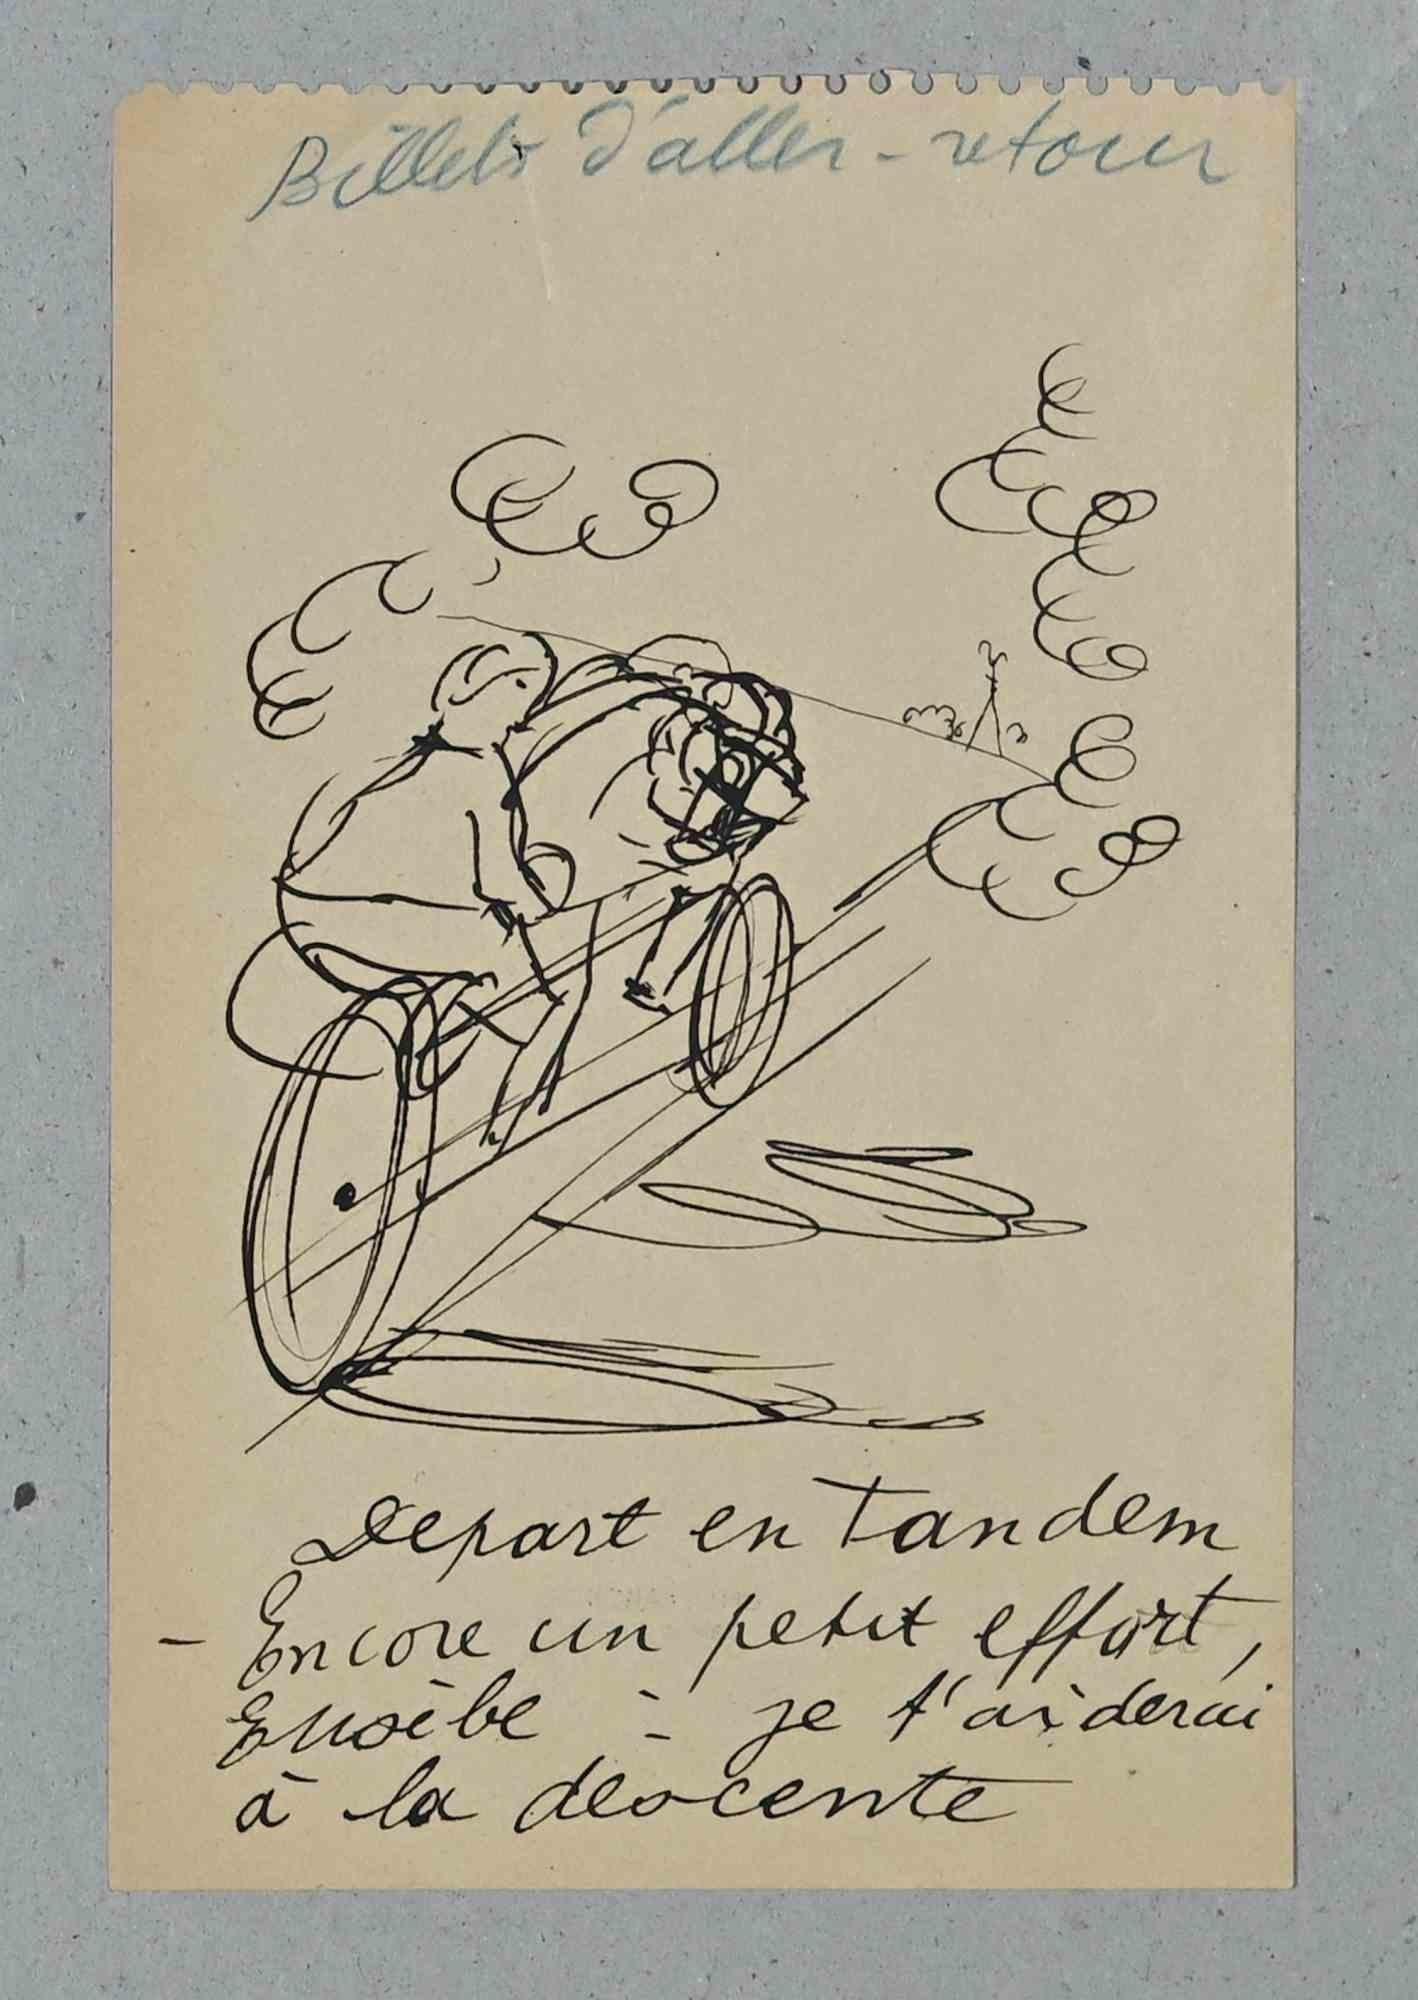 The Rider is an Original China ink drawing on paper realized by Charkes Laborde in 1935.

Stamped on the rear.

The artwork is in good condition on creamy-colored paper, including a white cardboard Passepartout.